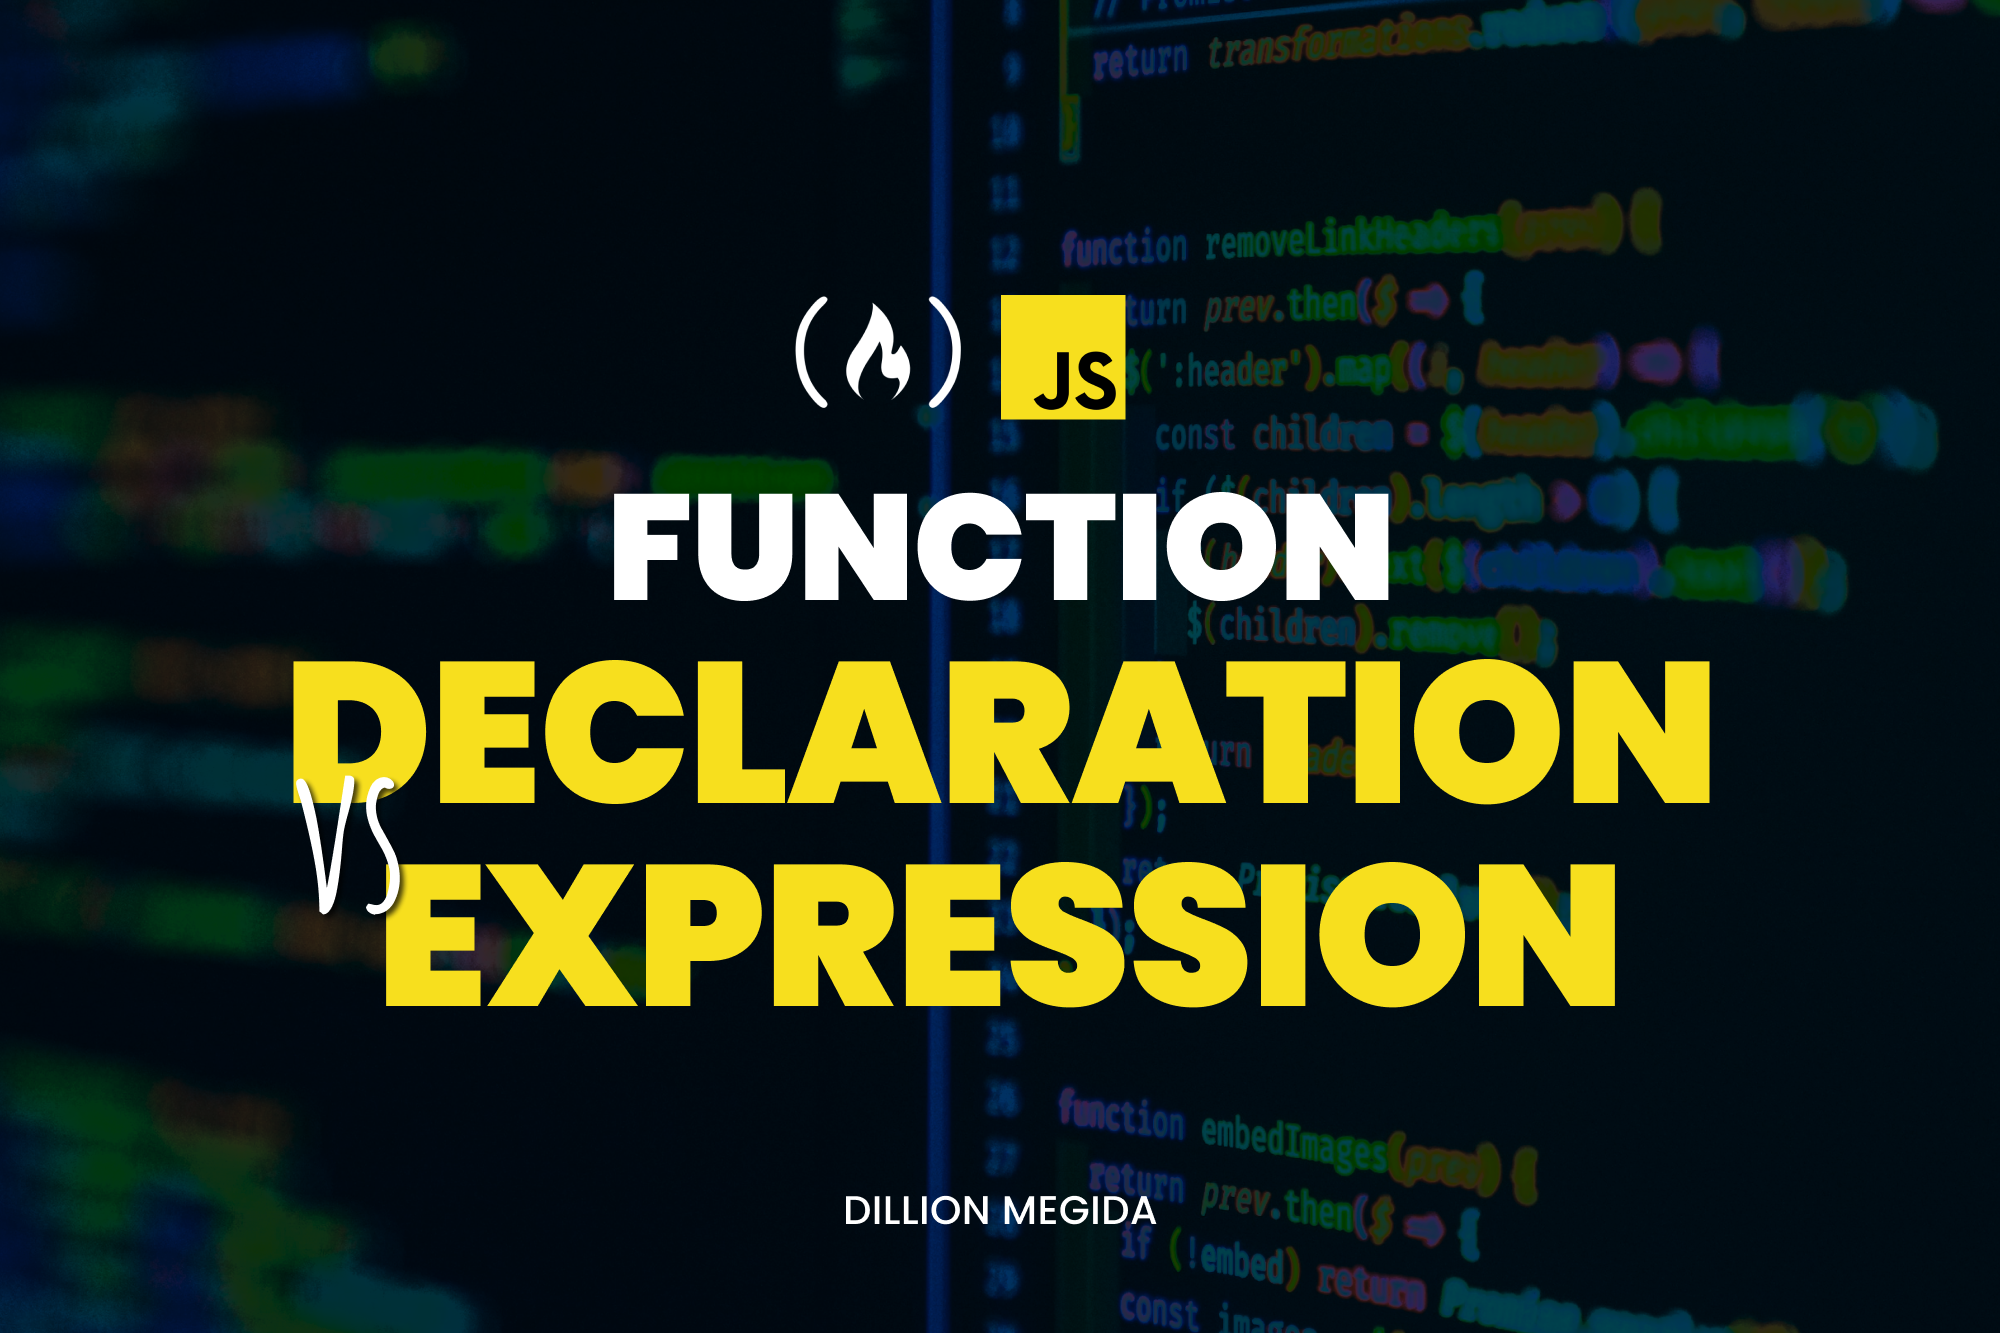 Function Declaration vs Function Expression